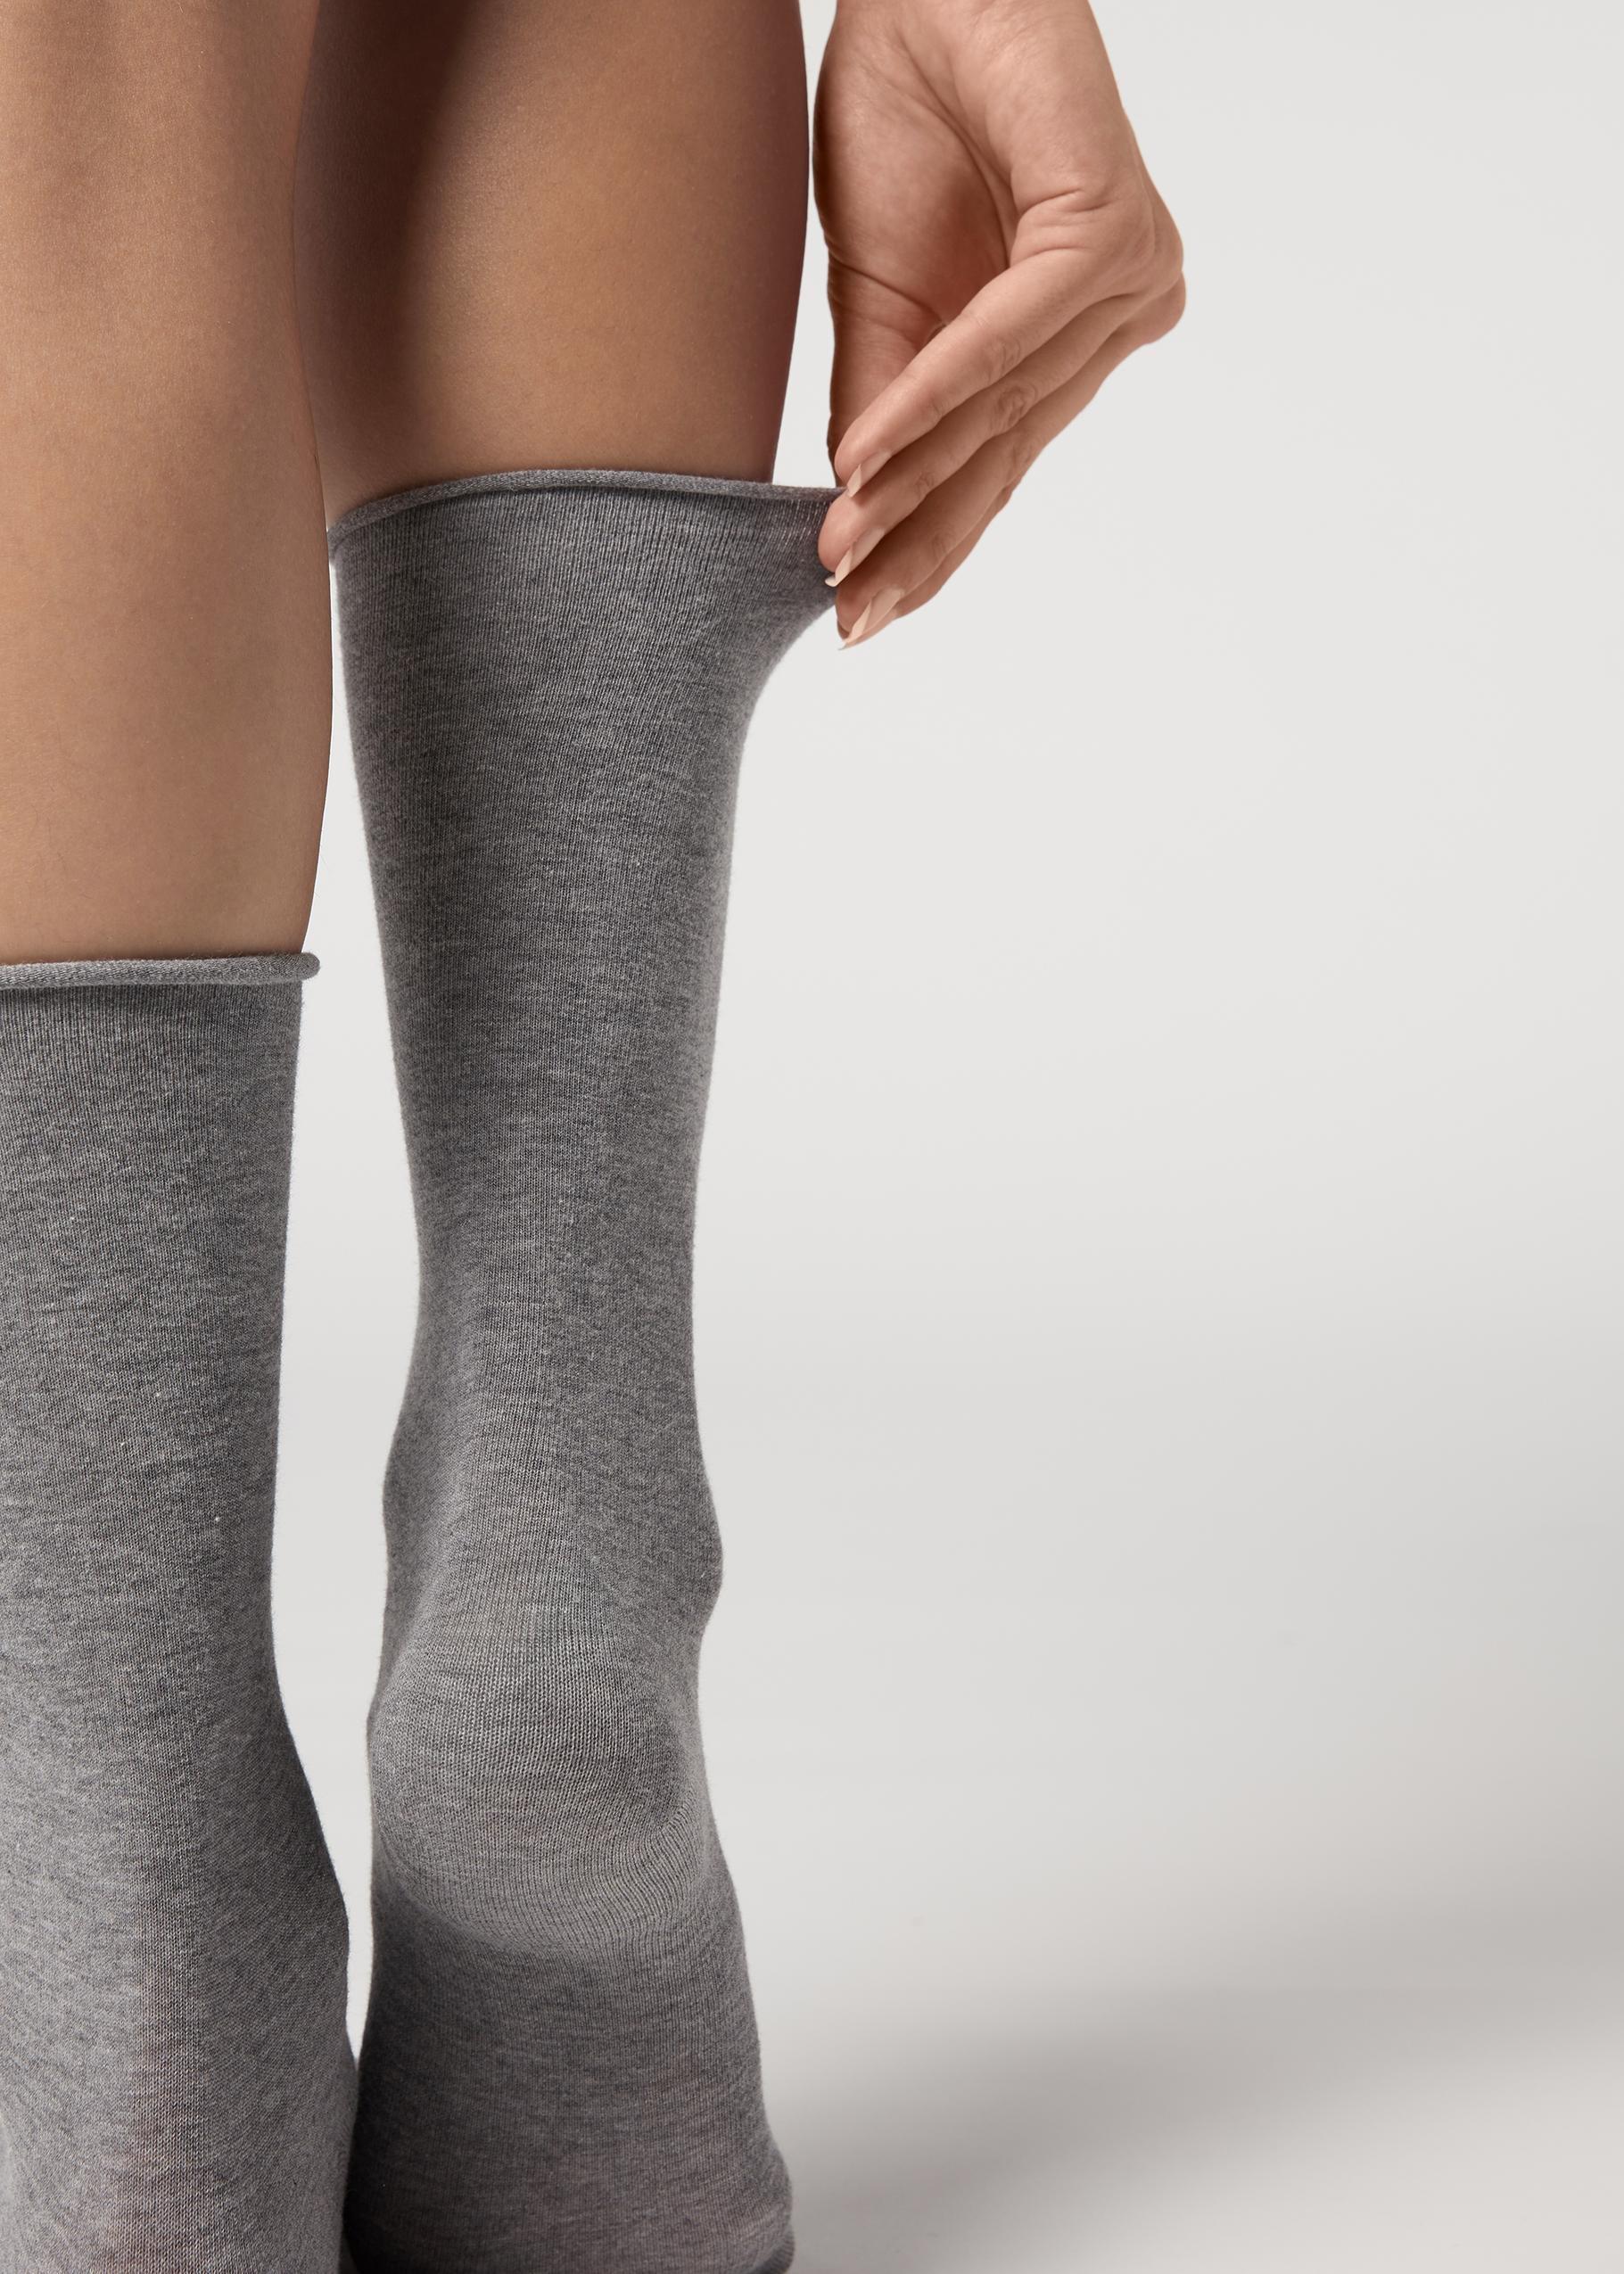 Calzedonia - Grey Blend Smooth Cotton Mid-Calf Socks - One-Size